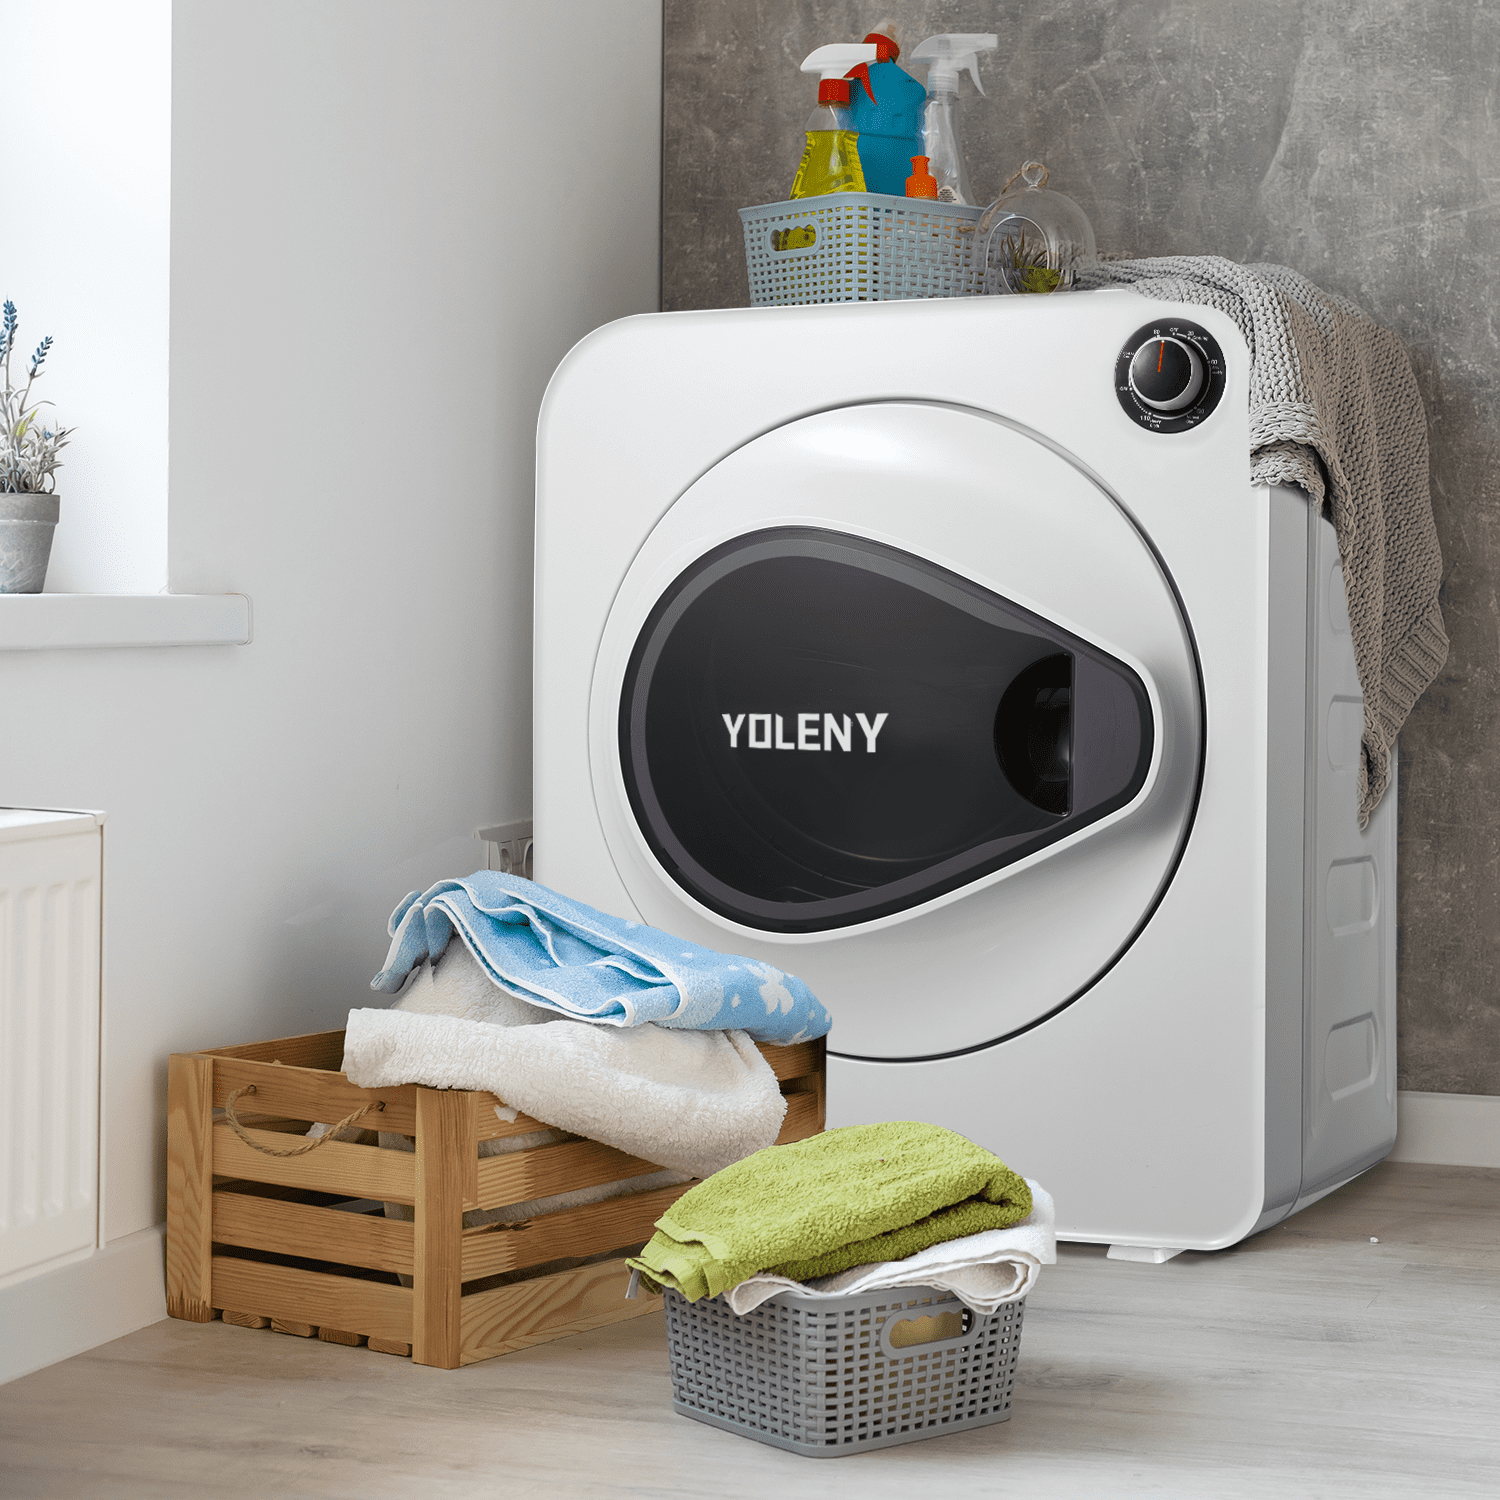  Portable Dryers for Laundry - Portable Clothes Dryer